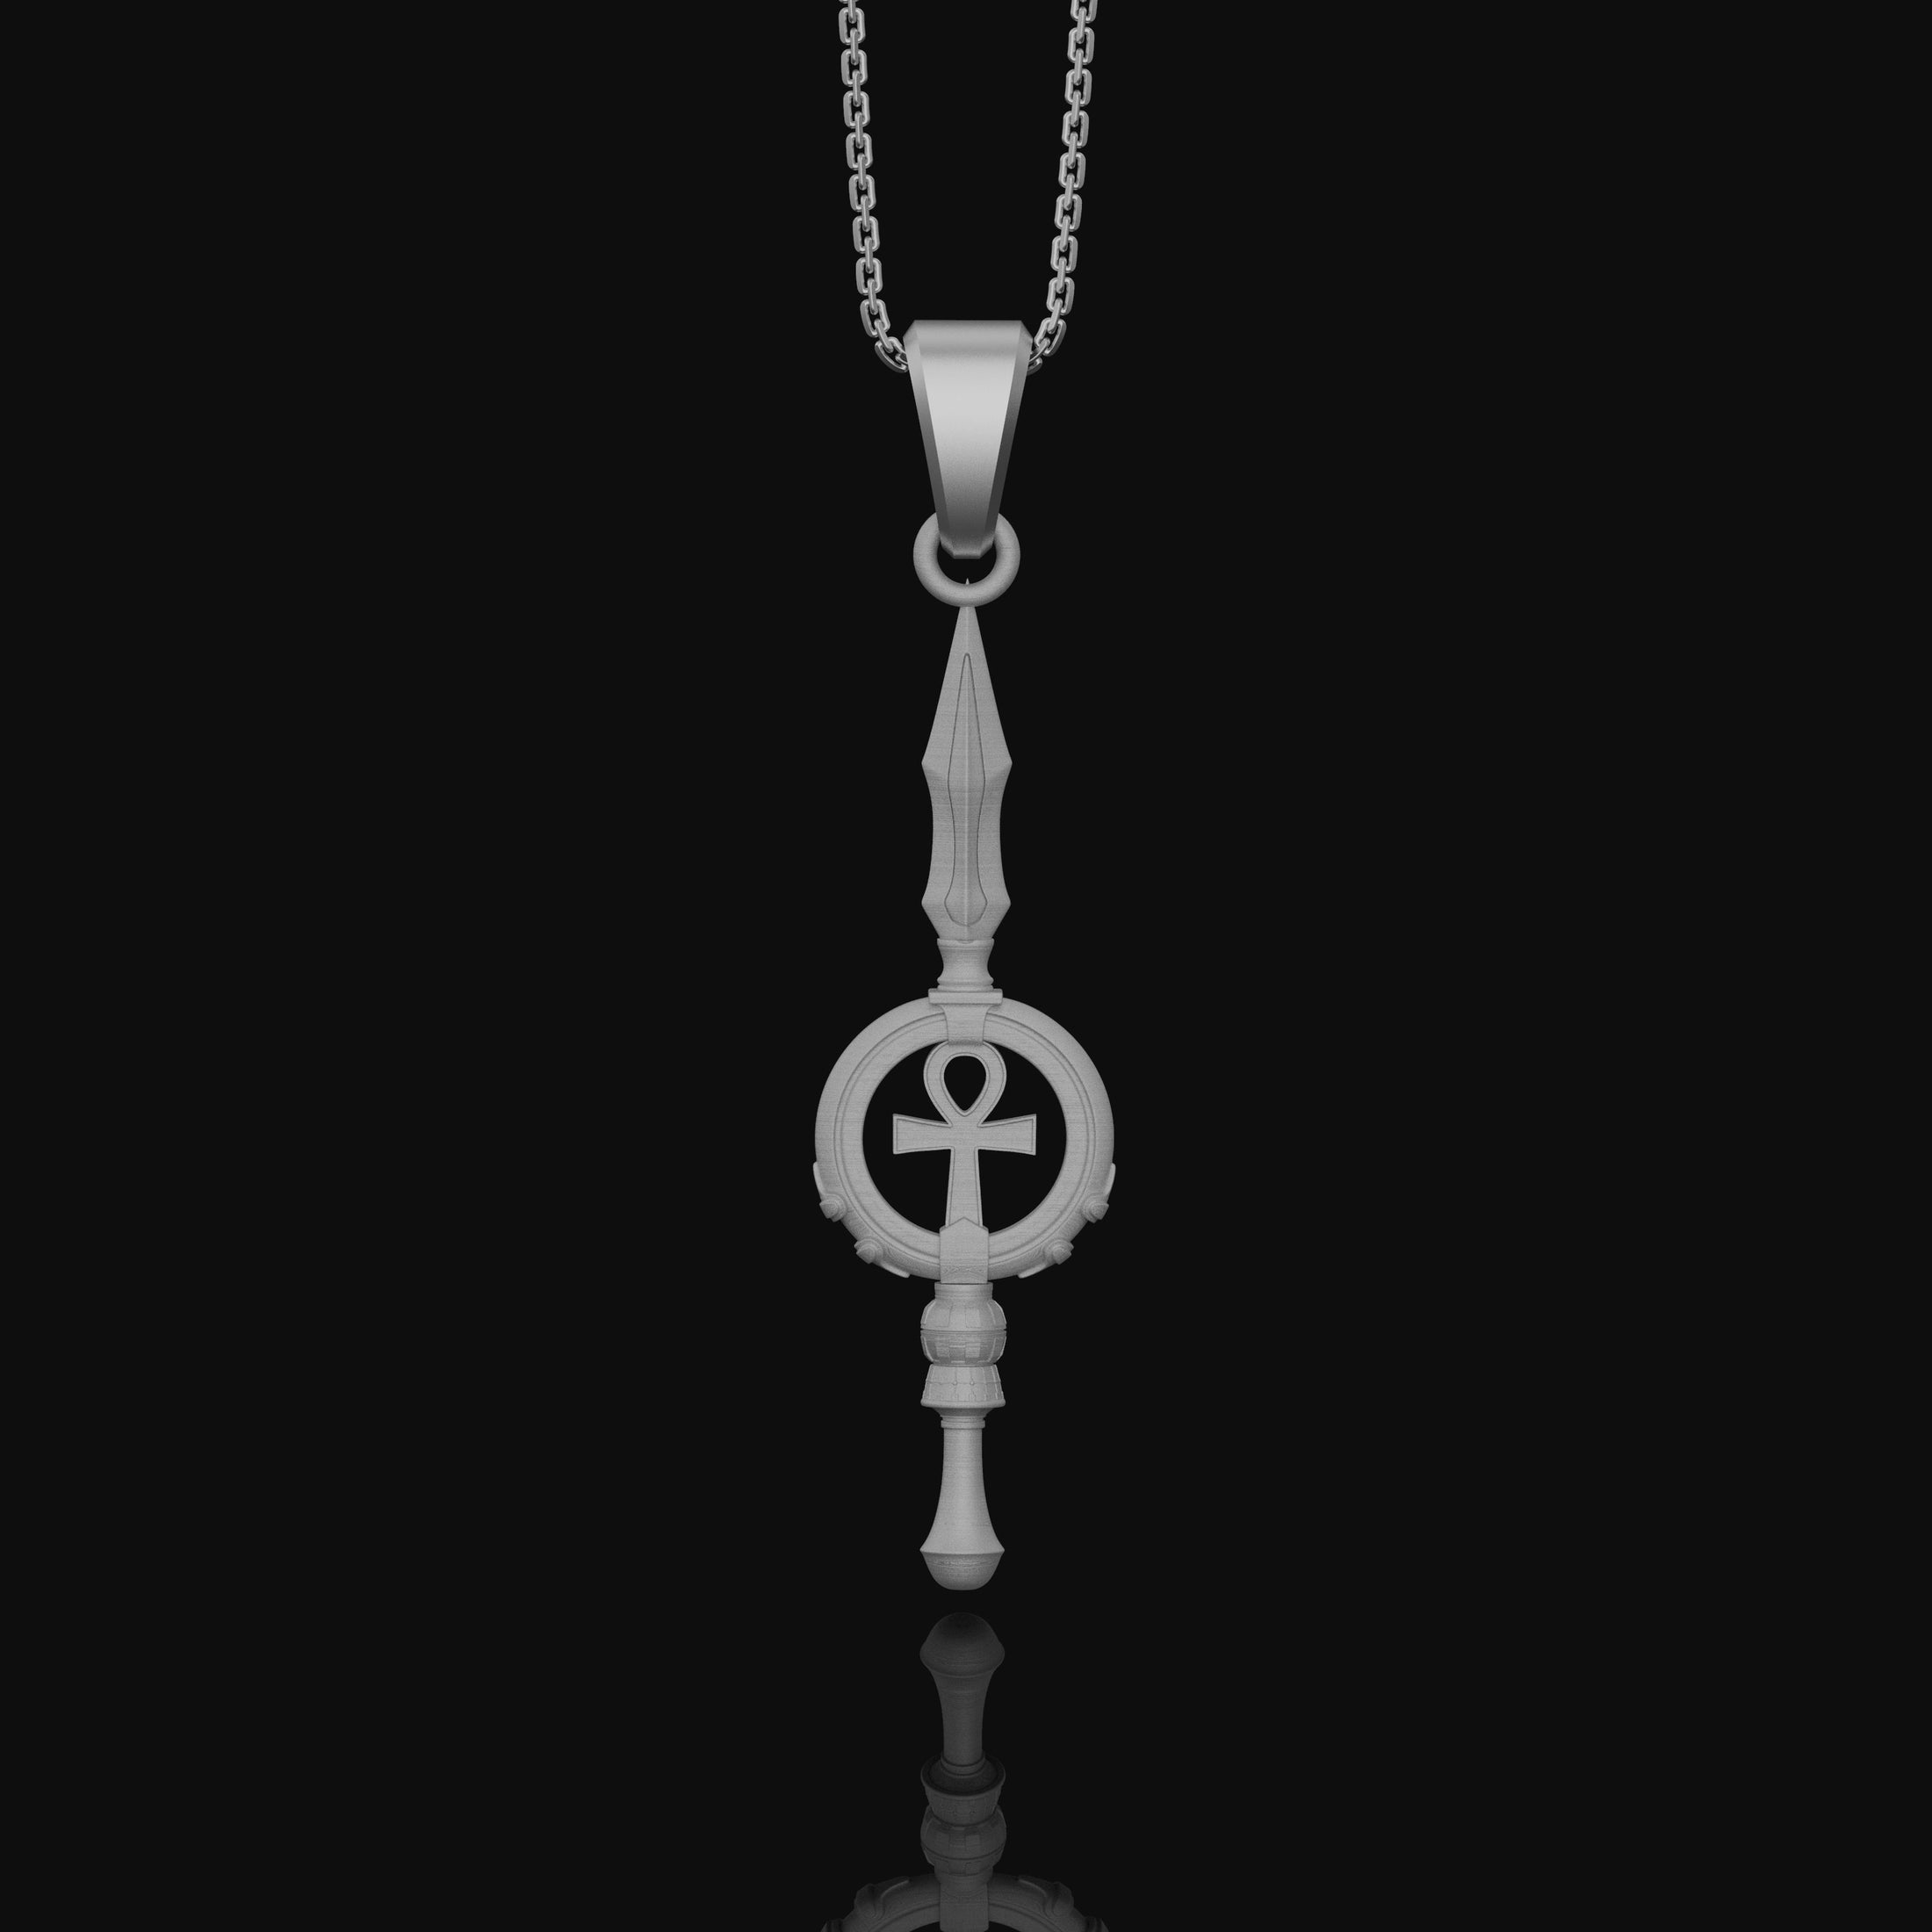 Silver Ankh Key Spear Charm Necklace - Elegant Ancient Egyptian Style, Spiritual Life Symbol, Warrior Inspired Jewelry Polished Matte